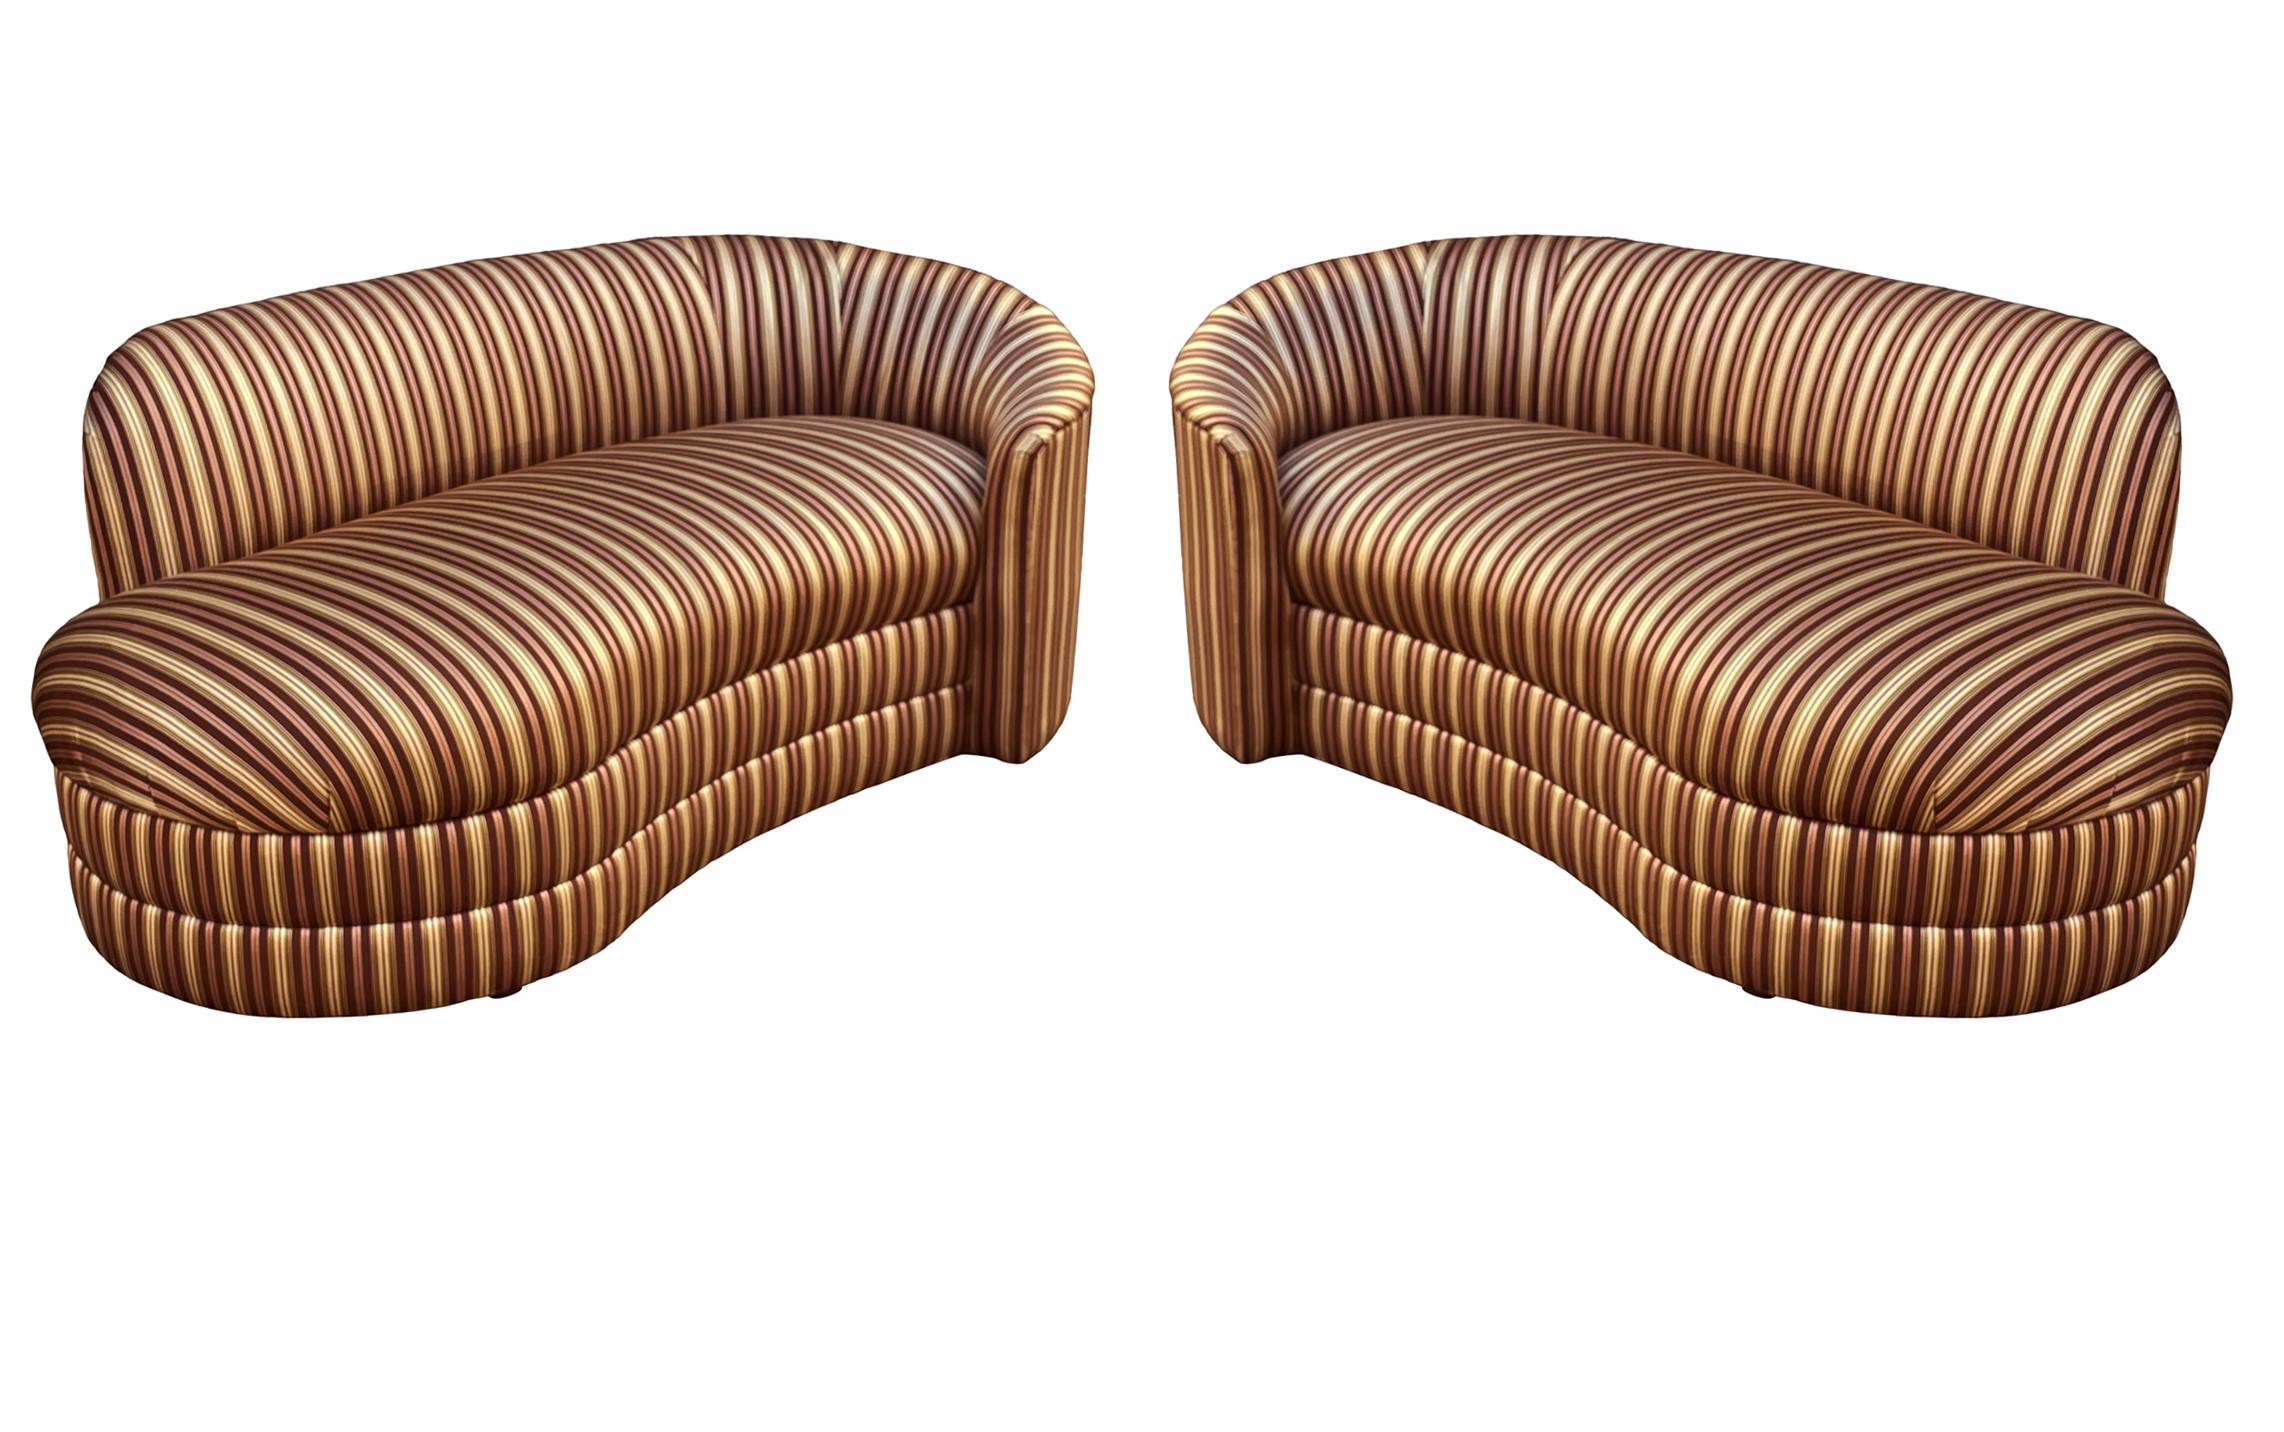 Pair of Hollywood Regency Opposing Curved Chaise Lounges, Sofas or Loveseats  For Sale 1